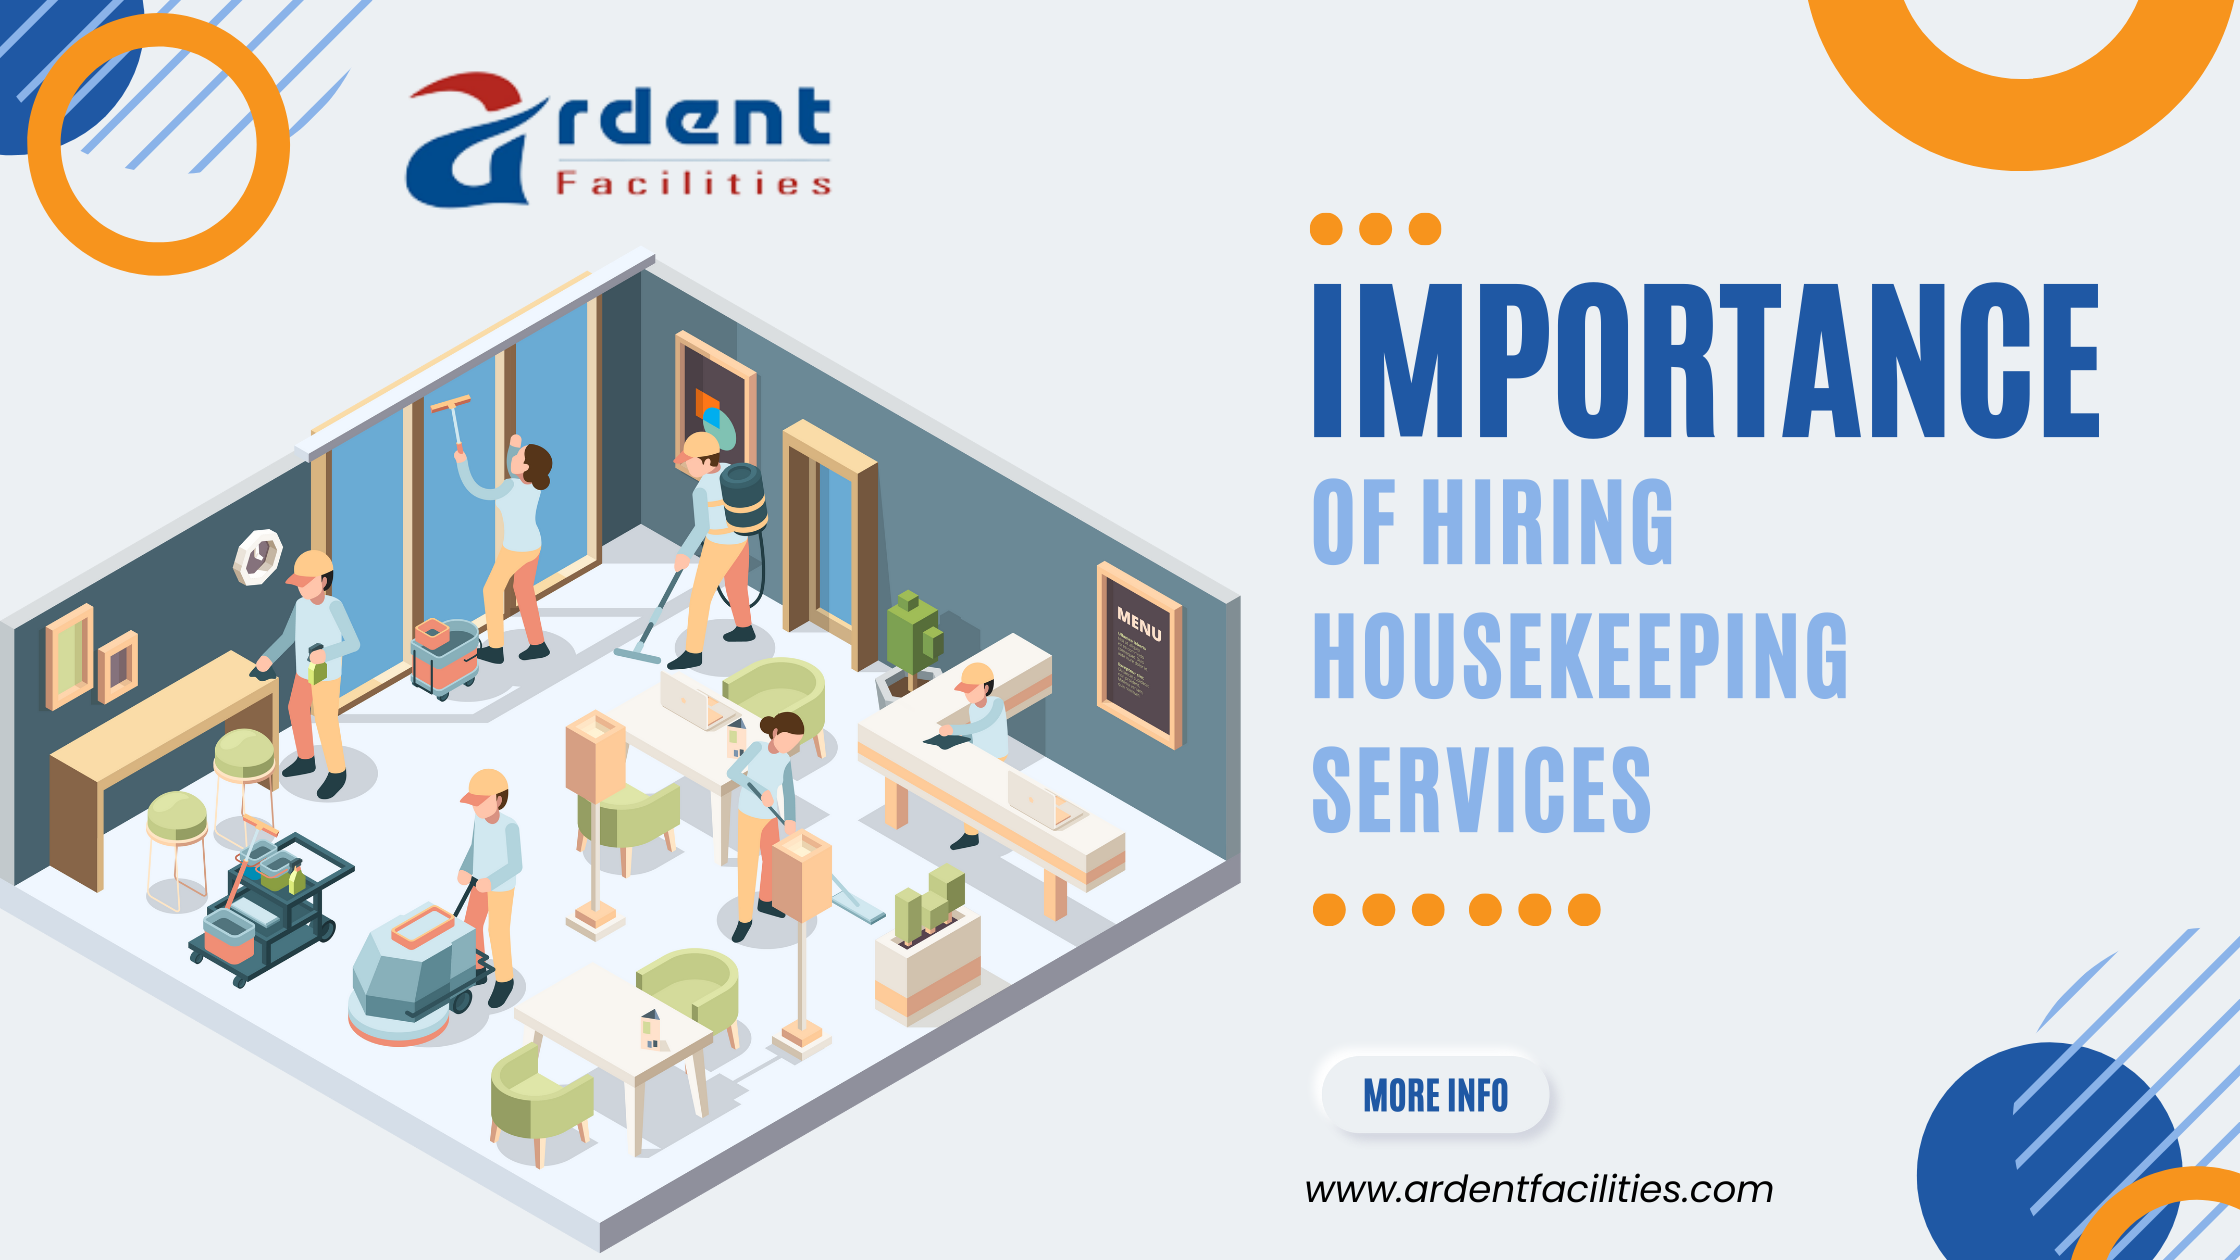 Importance of Hiring Housekeeping Services